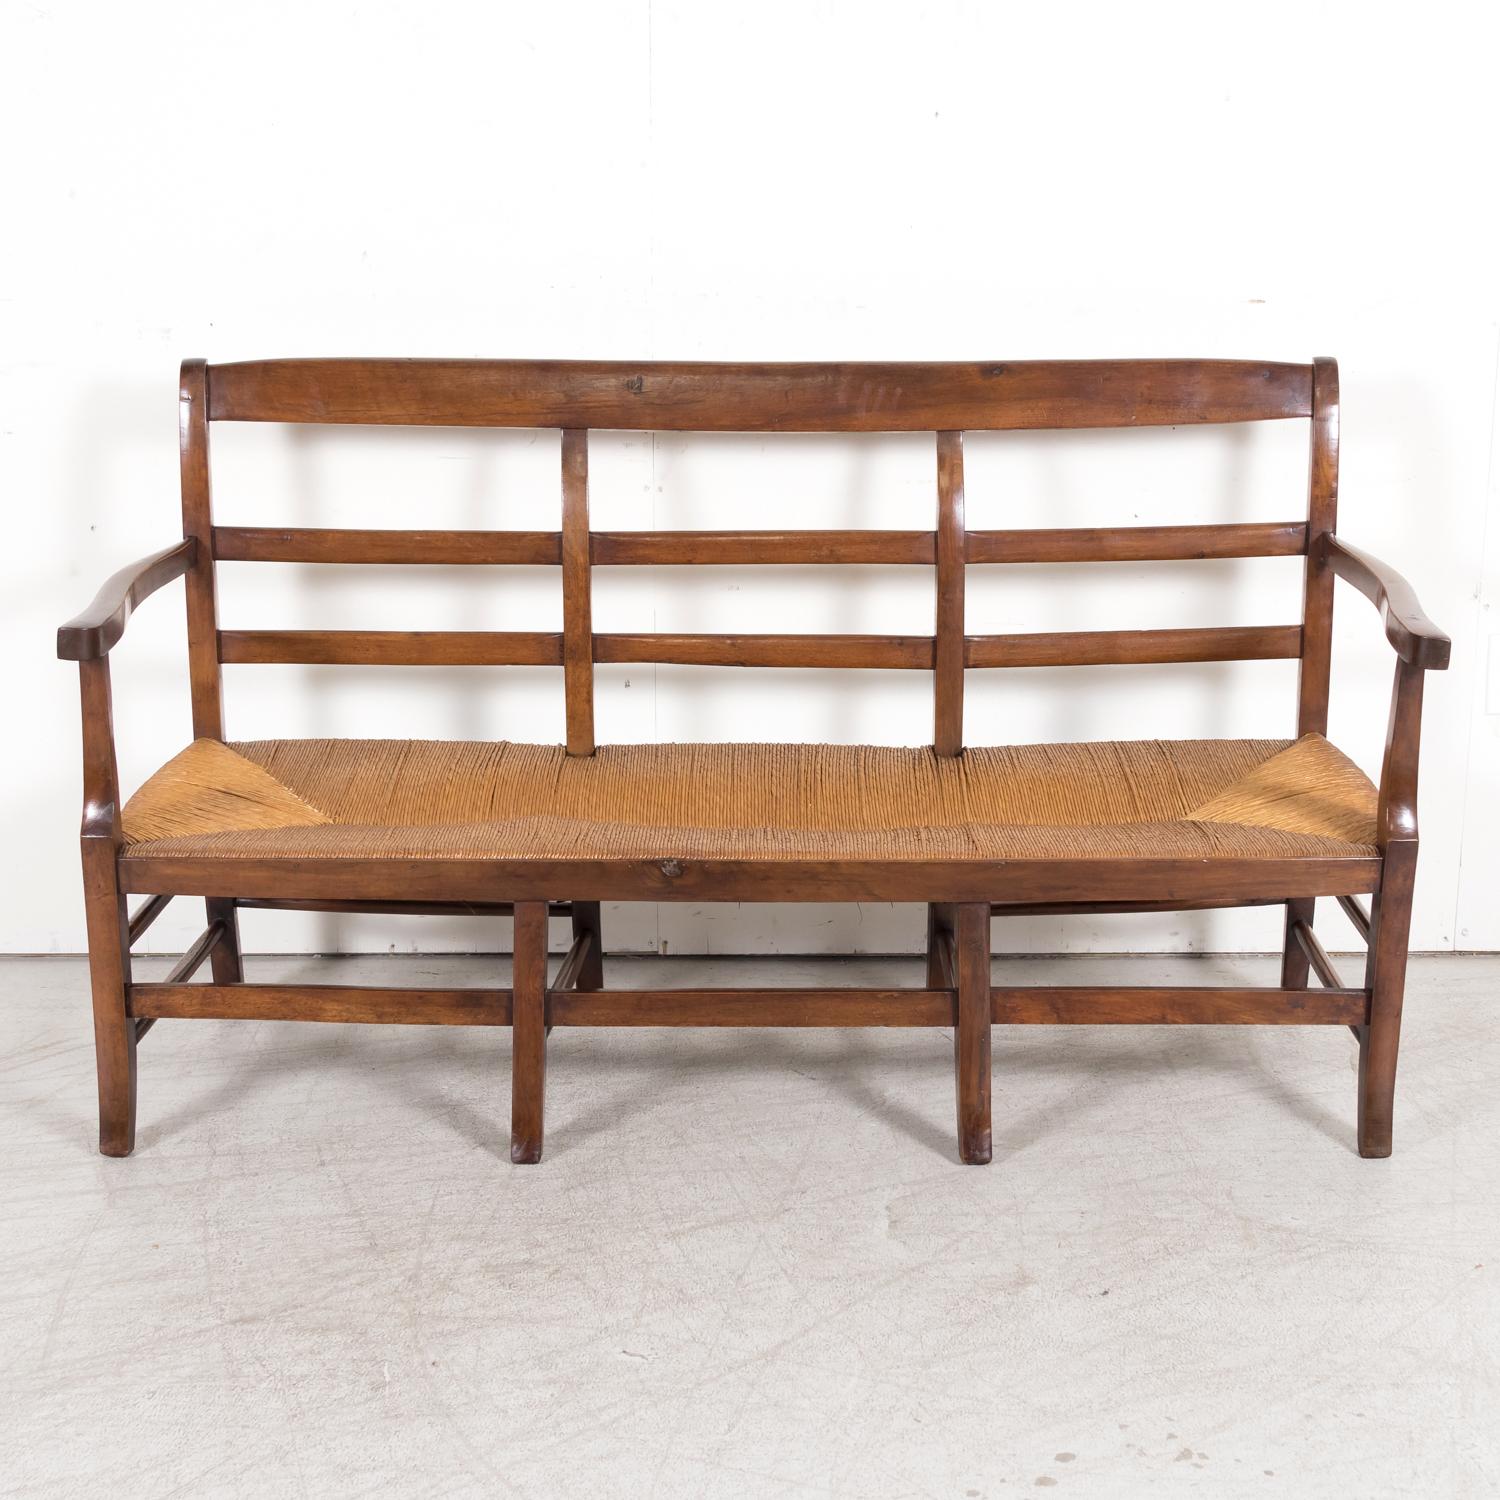 Mid-19th Century French Radassier or Ladder Back Rush Seat Bench In Good Condition In Birmingham, AL